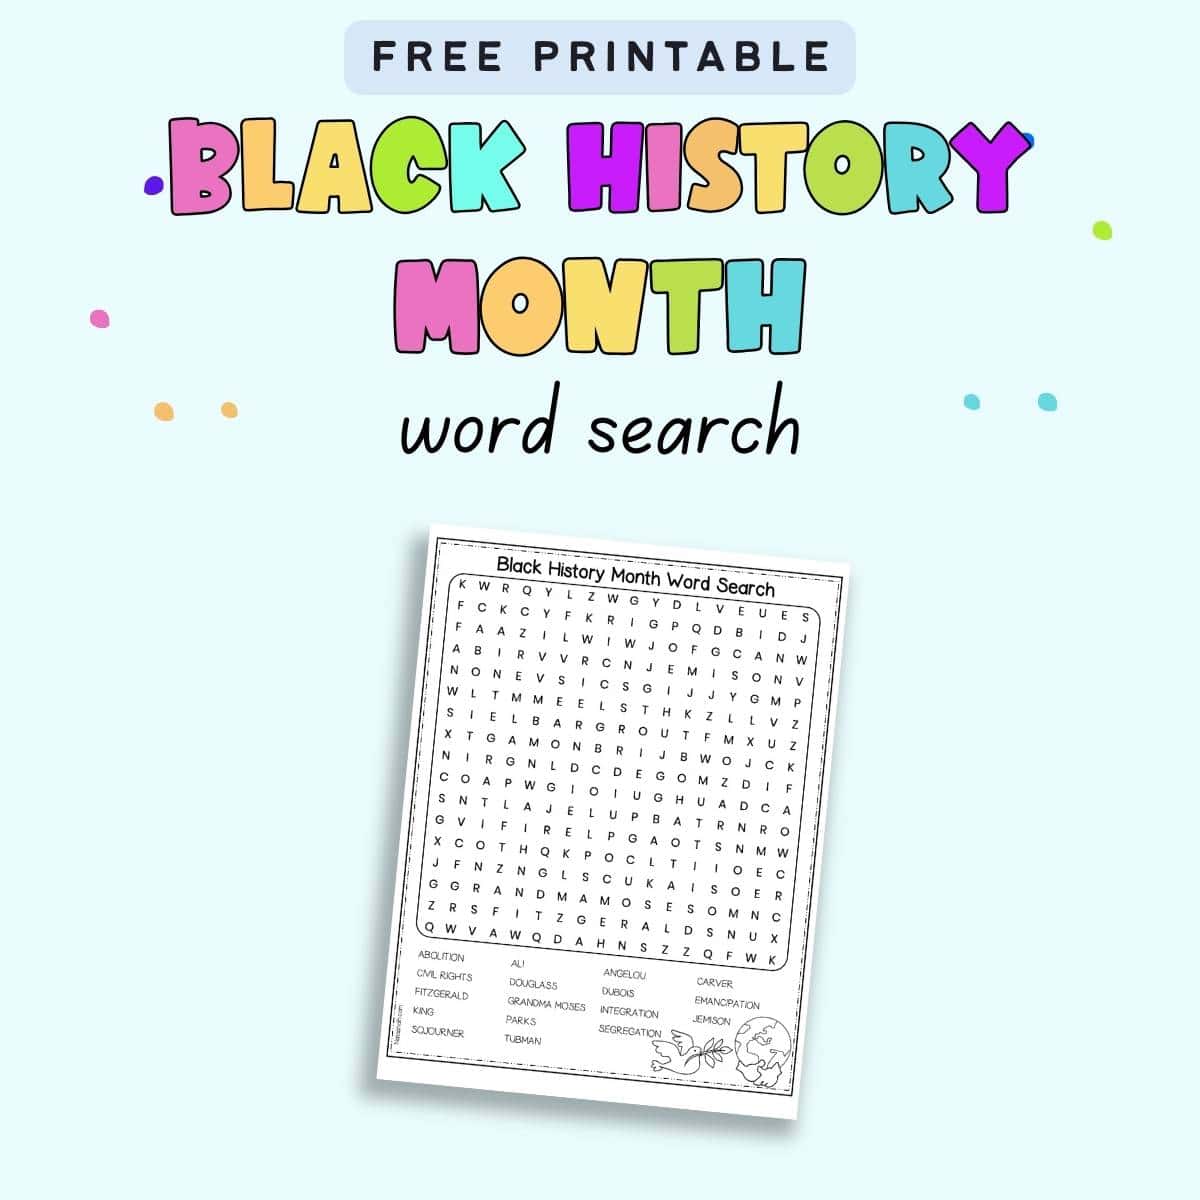 Text "free printable black history month word search" with a preview of a word search puzzle